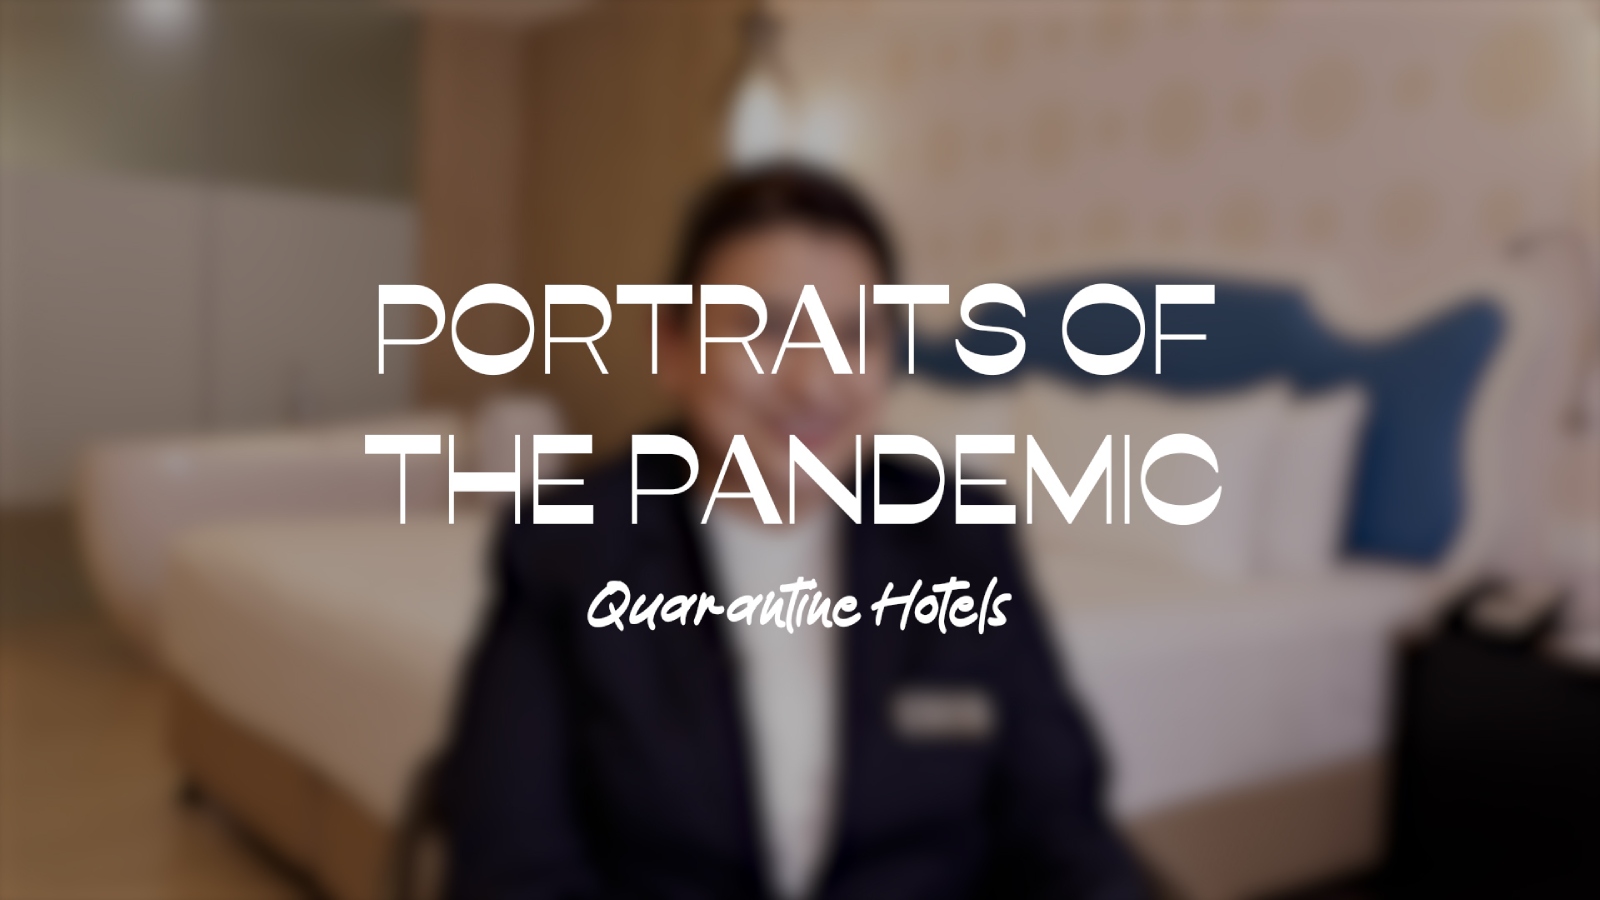 Post thumbnail of Portraits of the Pandemic: Hotel housekeeper says having migrant workers during pandemic was like “having friends in your house”